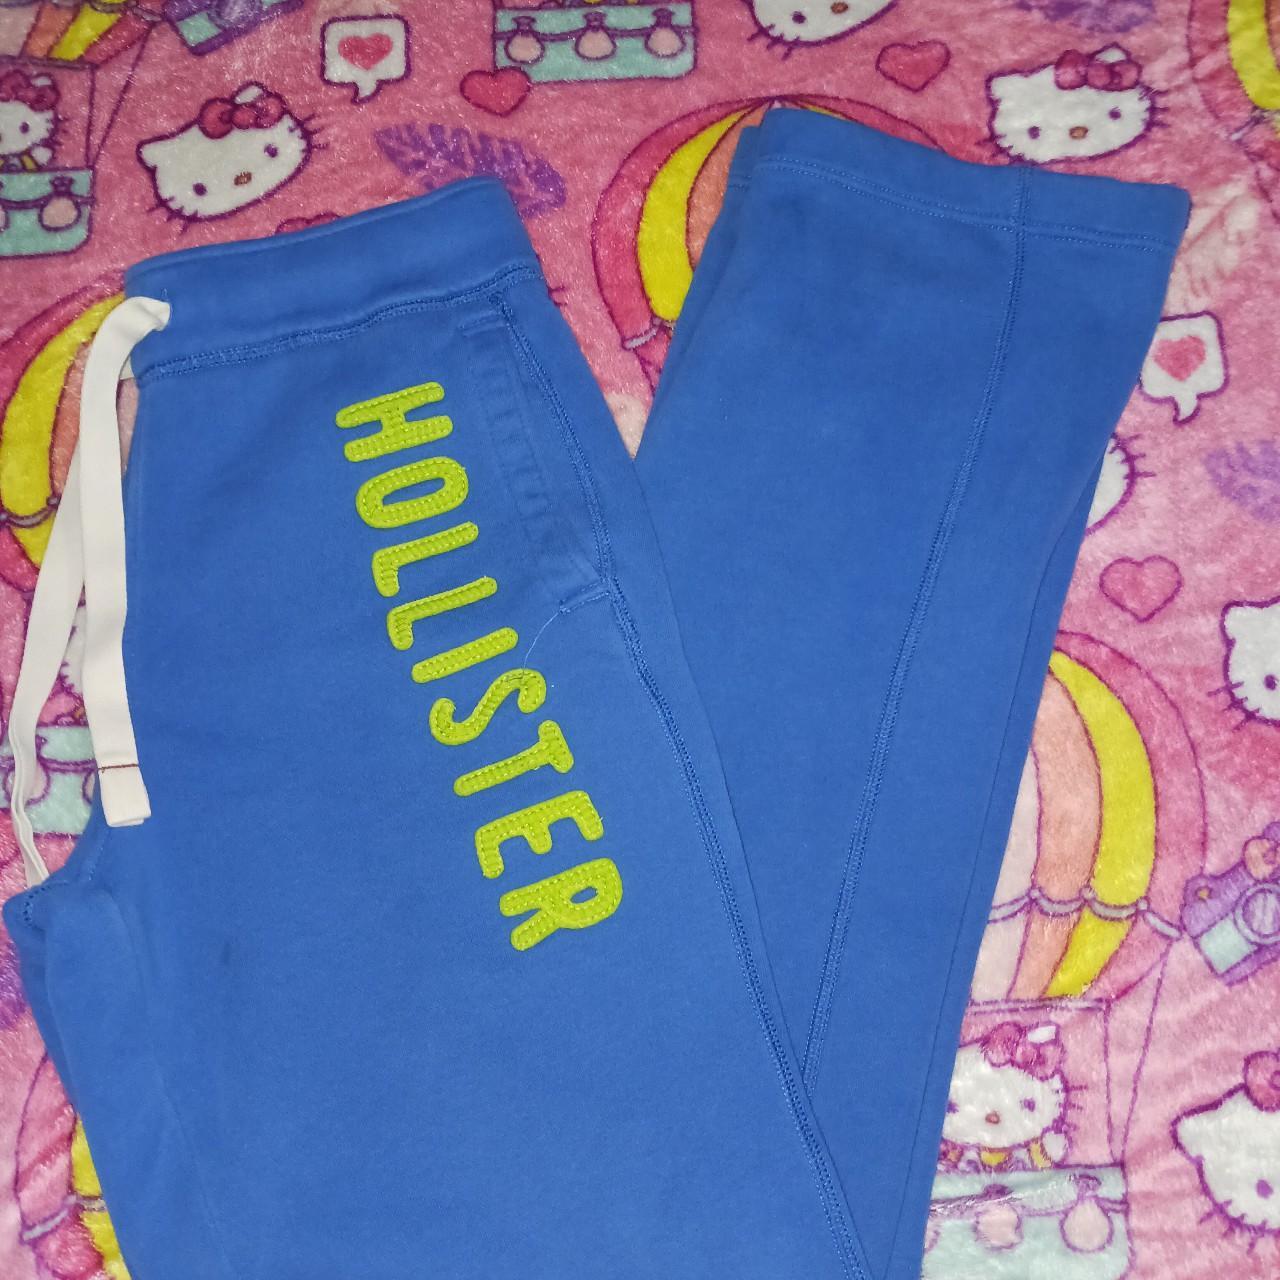 HOLLISTER NAVY BLUE SWEATPANTS }} ⚡️ they're in - Depop